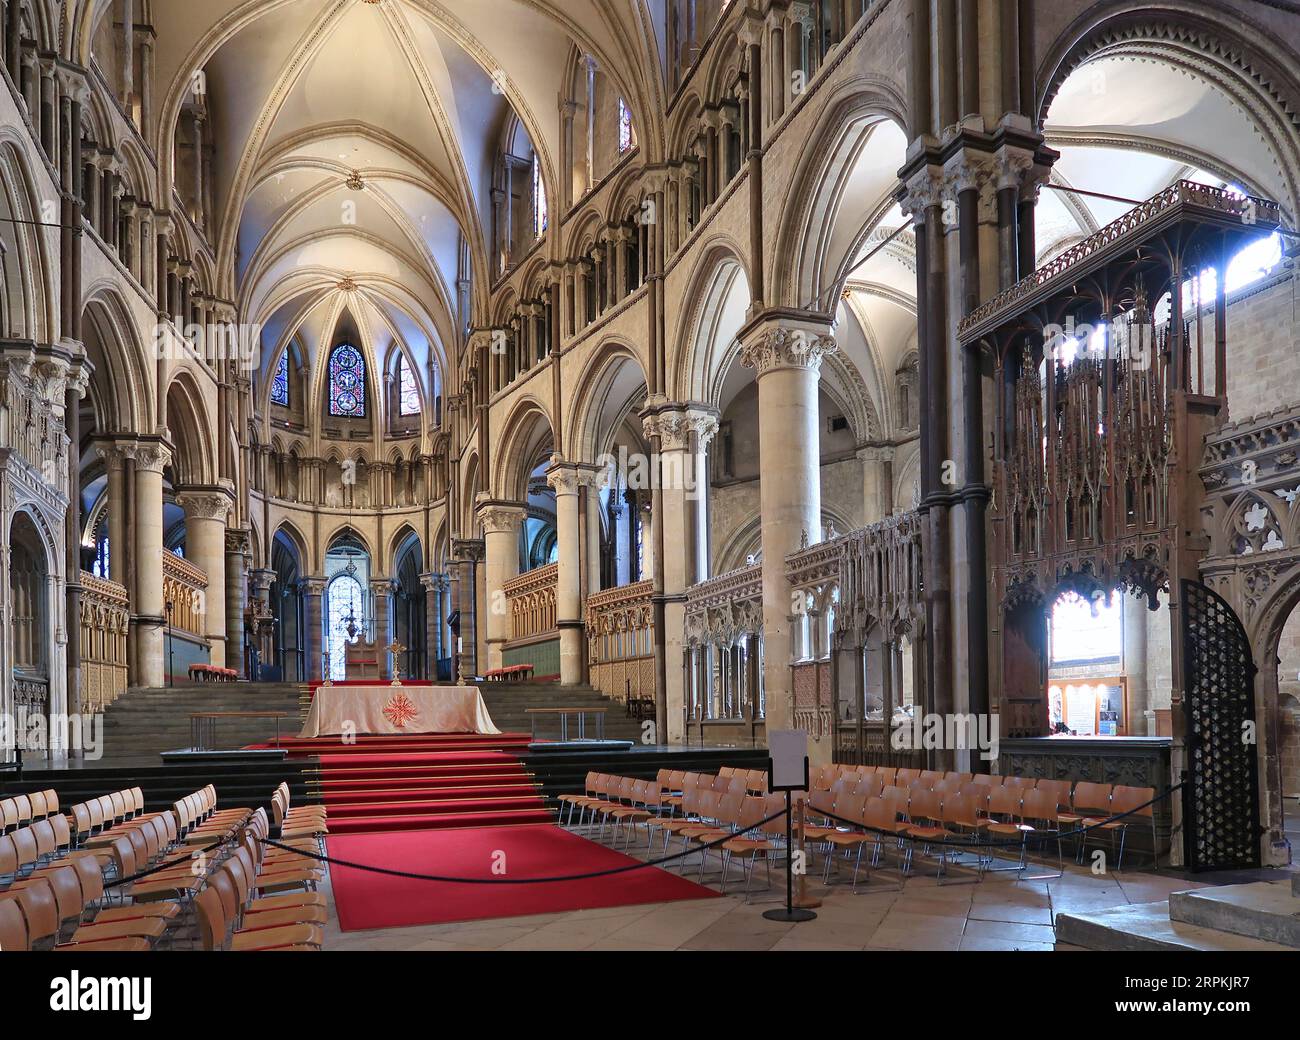 Canterbury Cathedral, Kent, UK. View of the Quire looking towards the altar and Trinity Chapel. Shows 12th century stone vaulting. No people present. Stock Photo